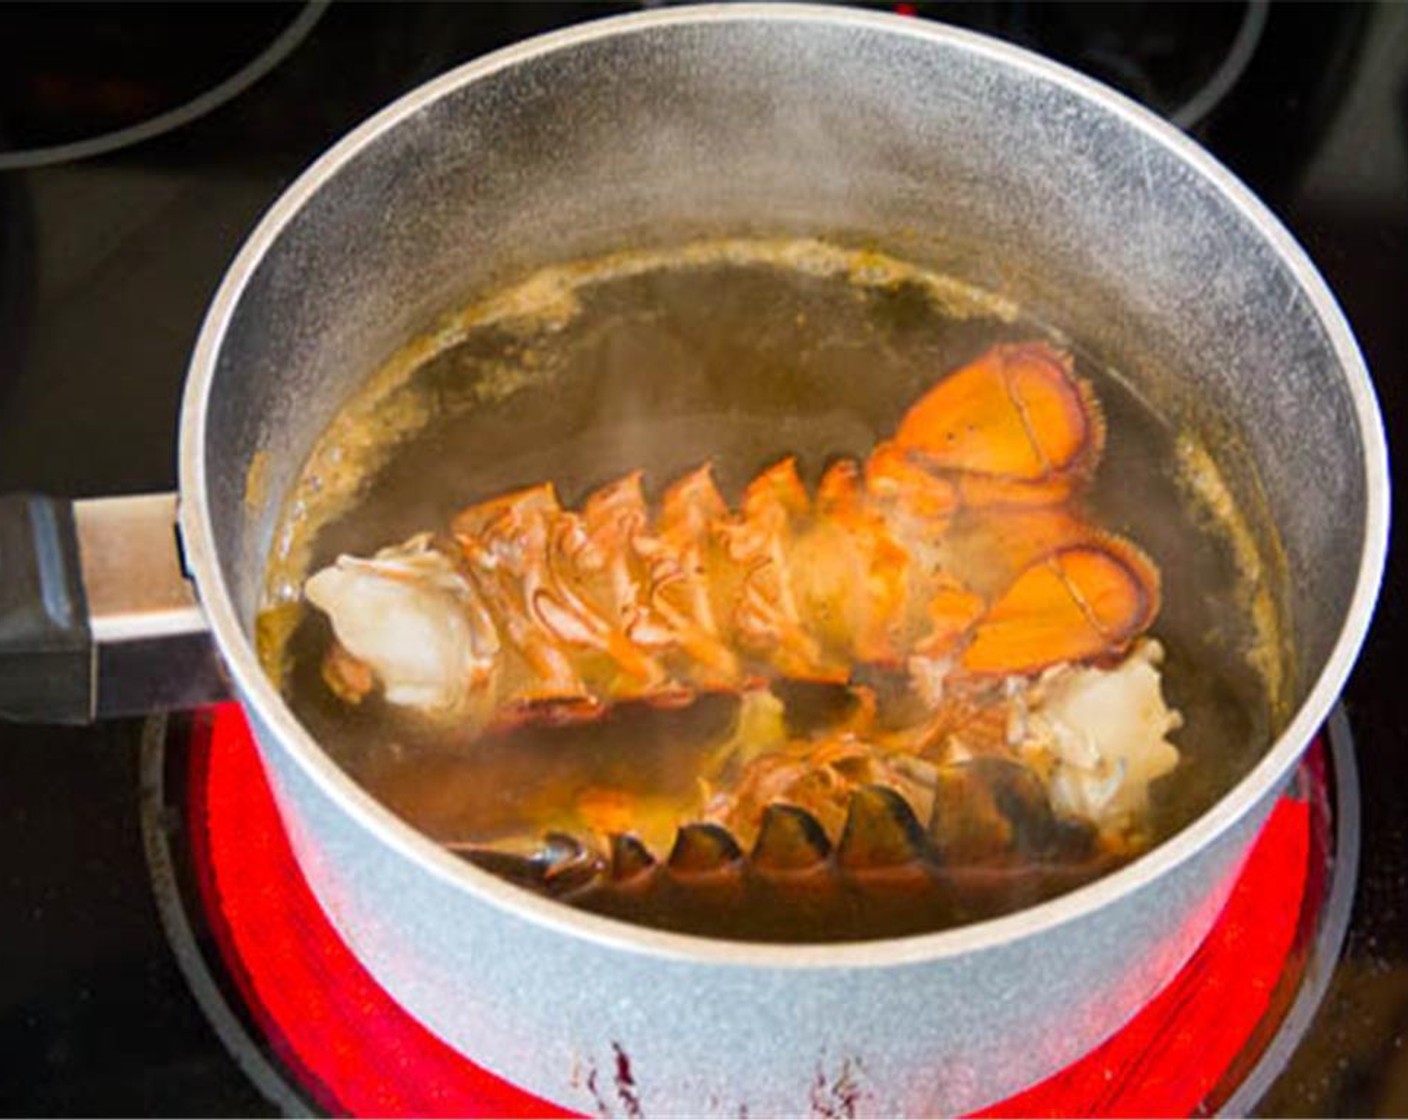 step 2 Take the lobster tails out of the water and remove the meat. Finely chop the lobster meat.